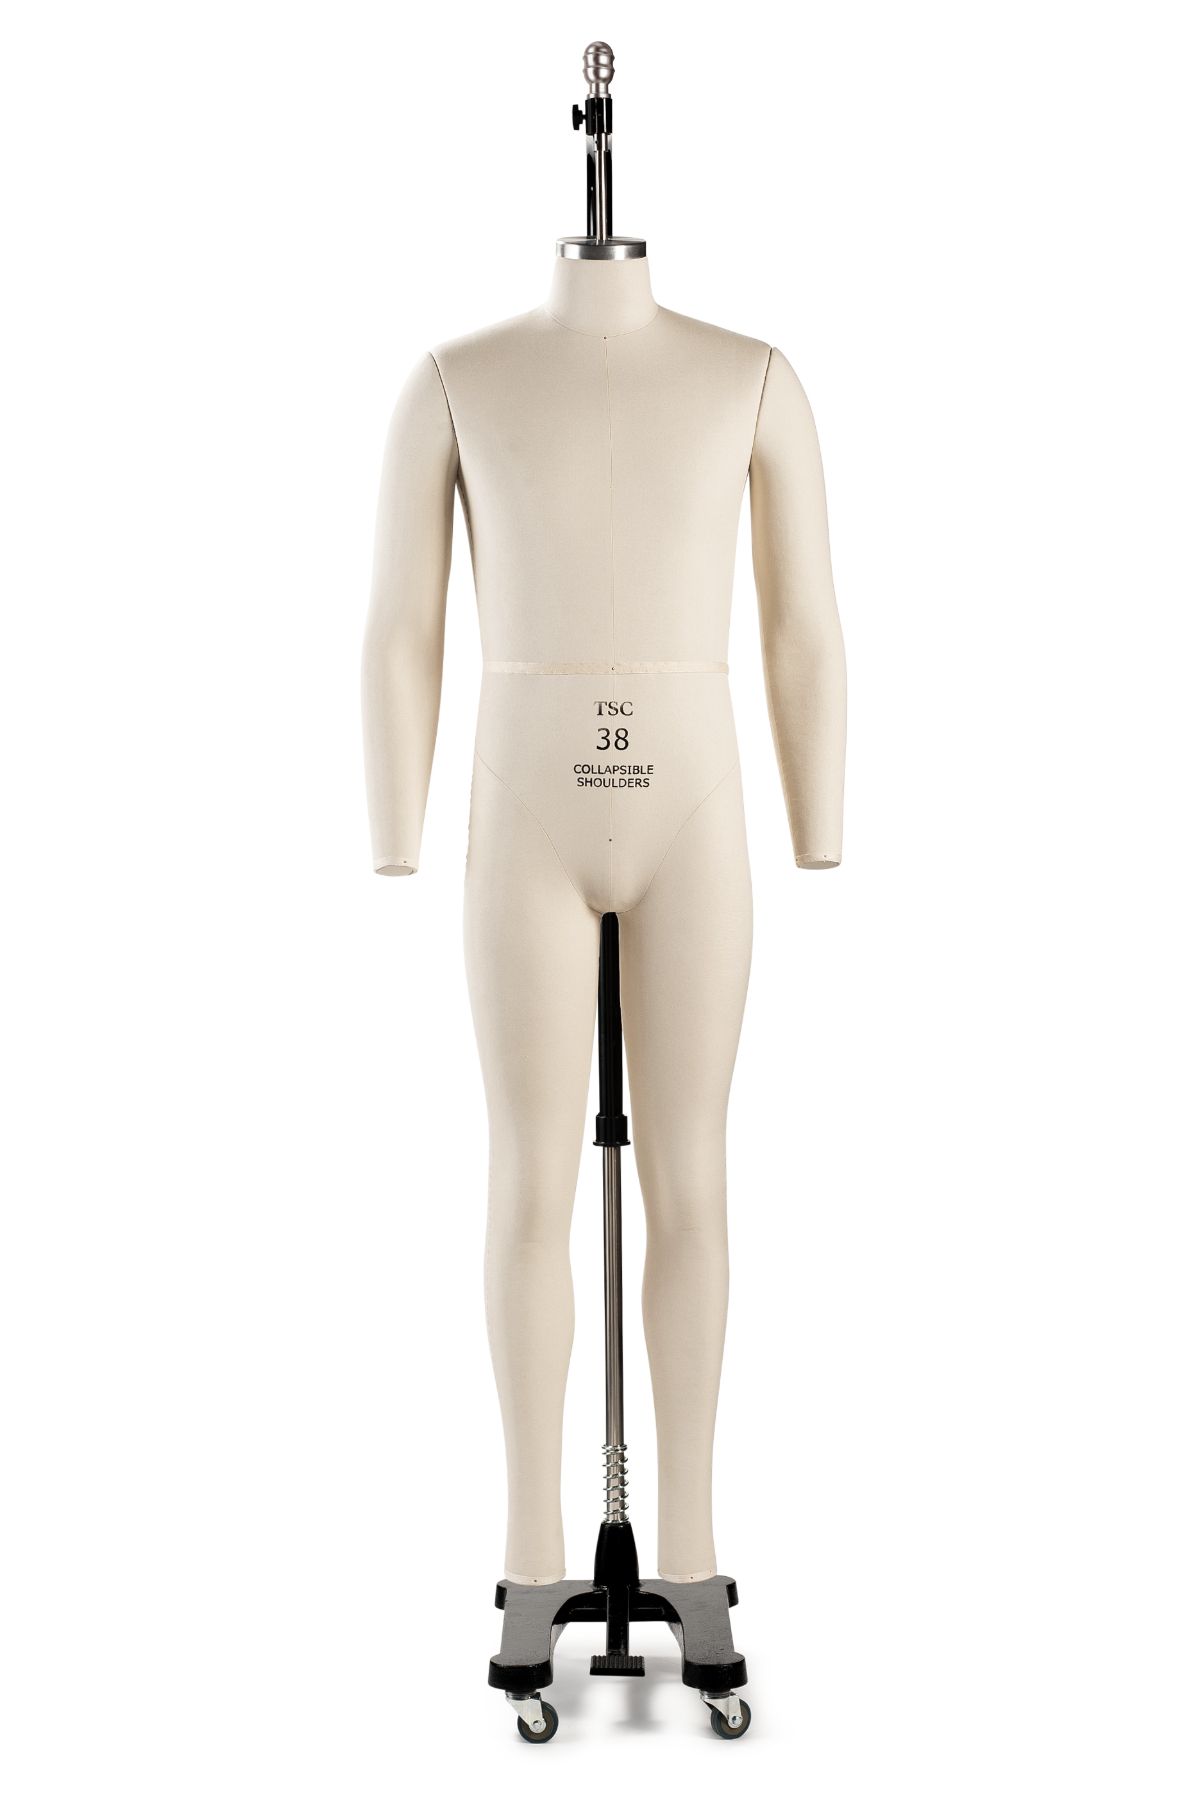 Professional Male Full Body Dress Form w/ Collapsible Shoulders and Legs